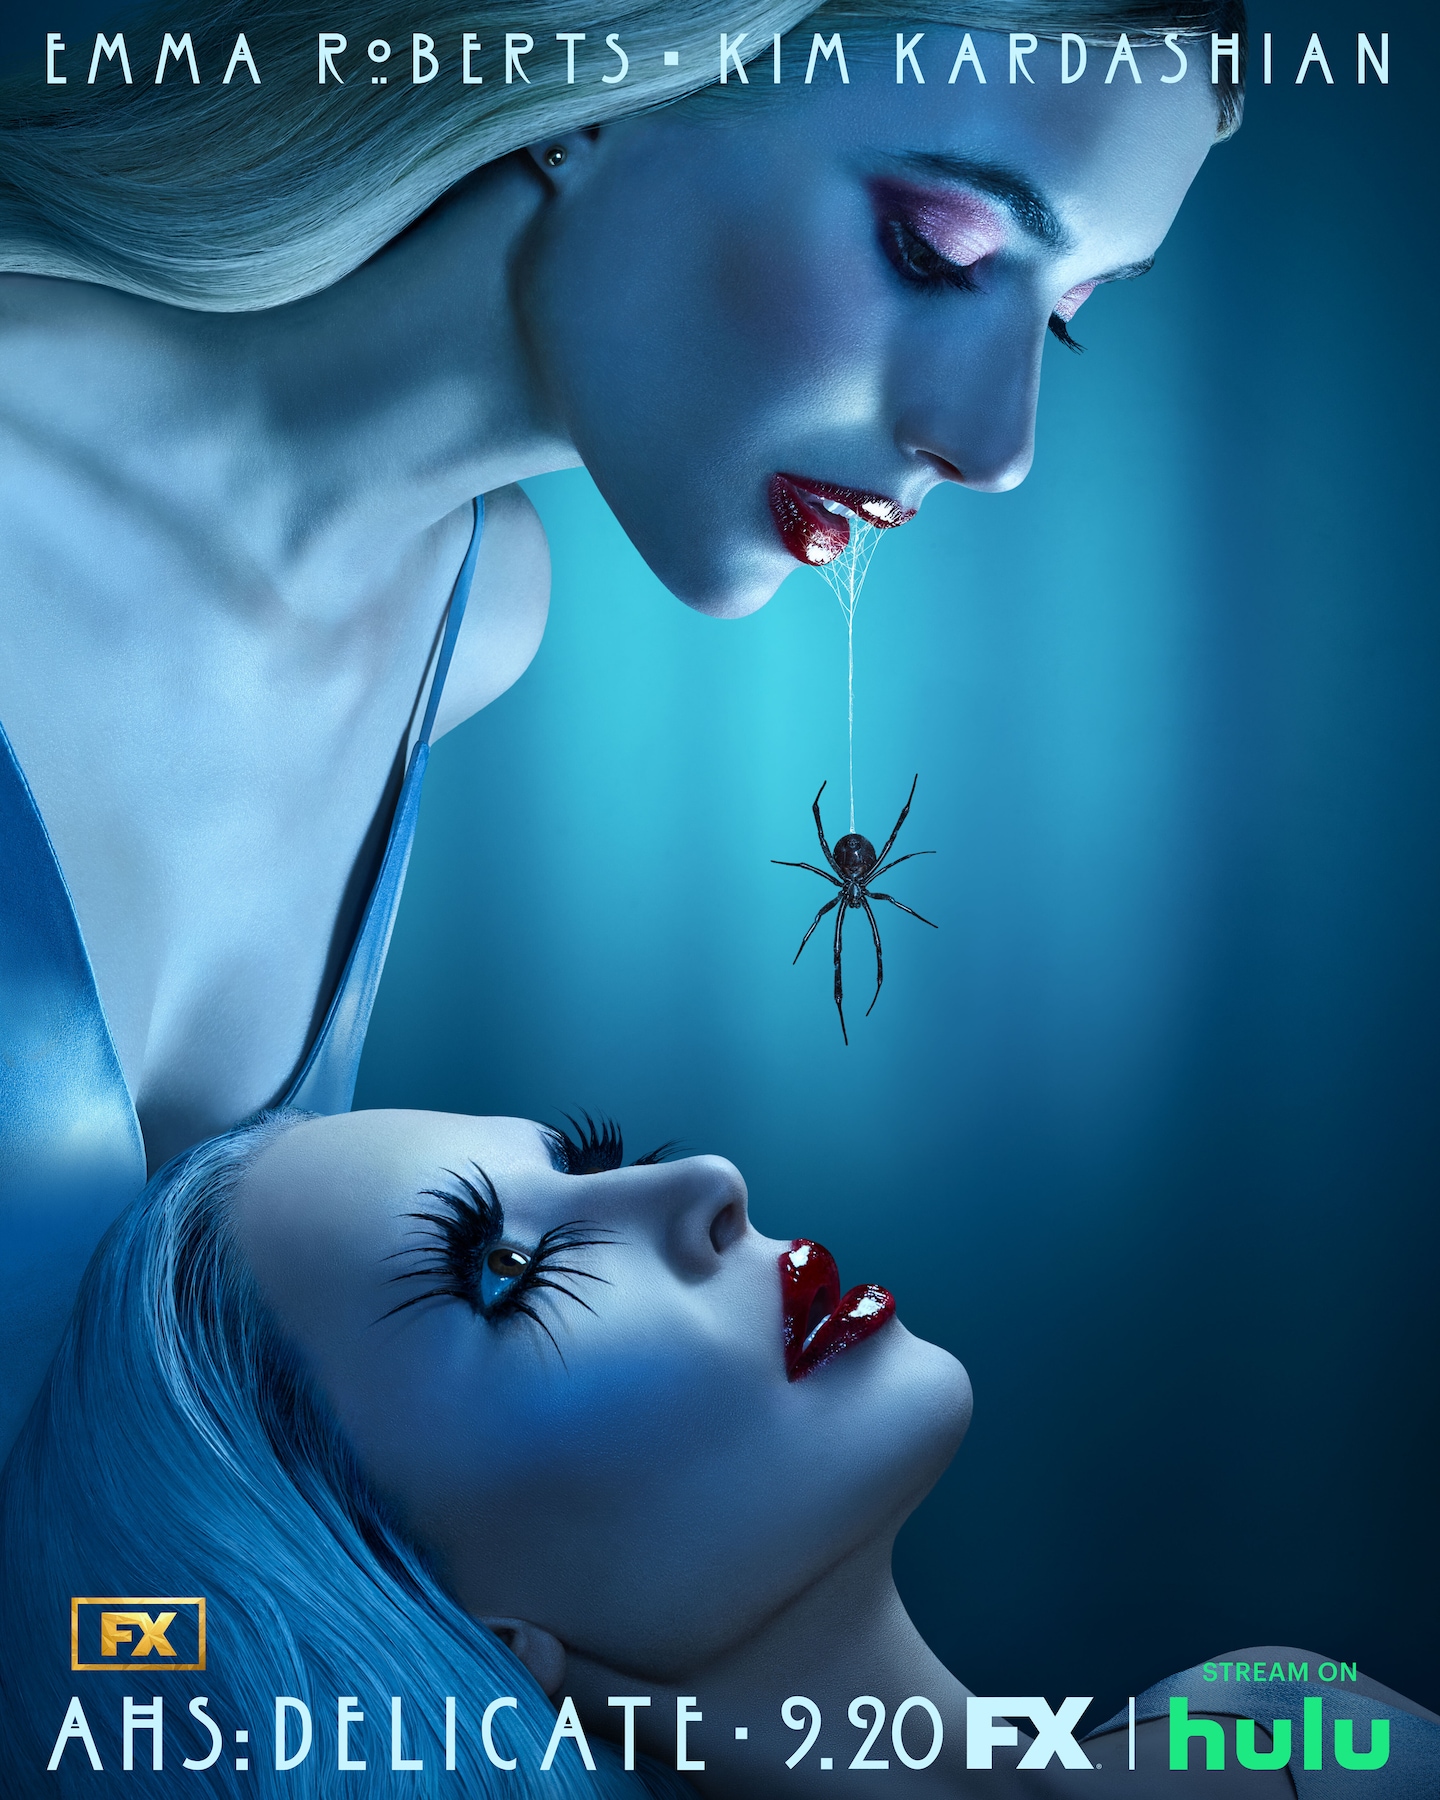 A pale woman hovers over another with a spider dangling from her red lips for AHS: Delicate